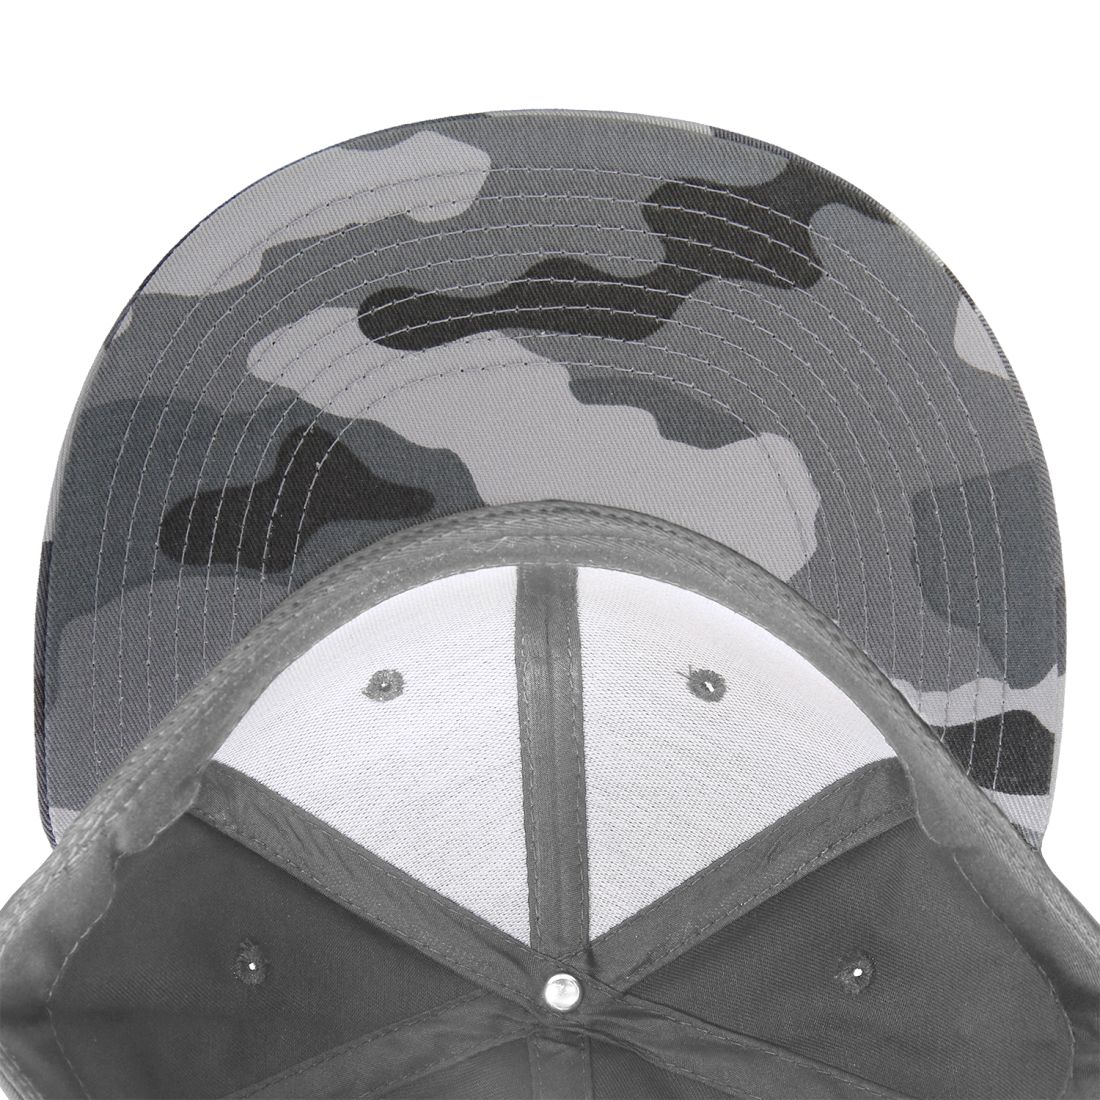 Decky 1047 Camouflage High Profile Snapback Hats 6 Panel Caps Flat Bill Army Wholesale